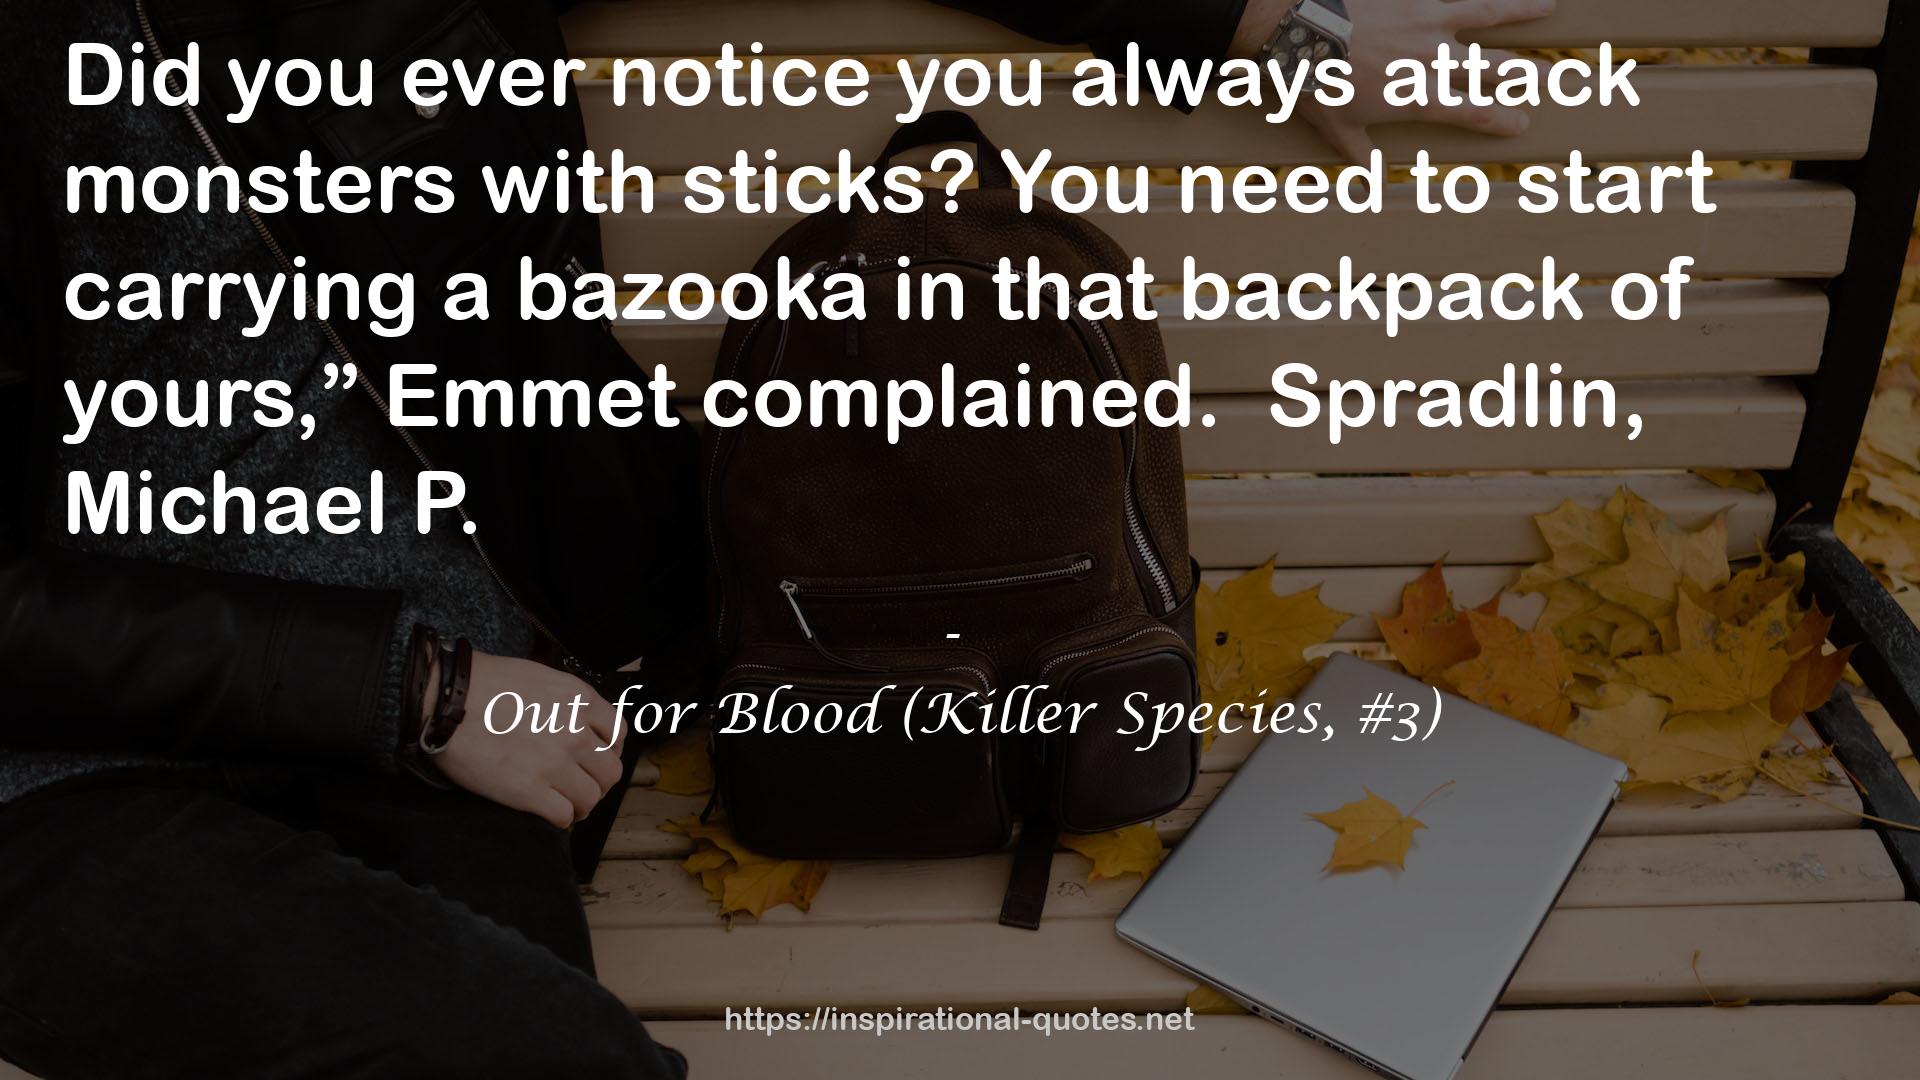 Out for Blood (Killer Species, #3) QUOTES